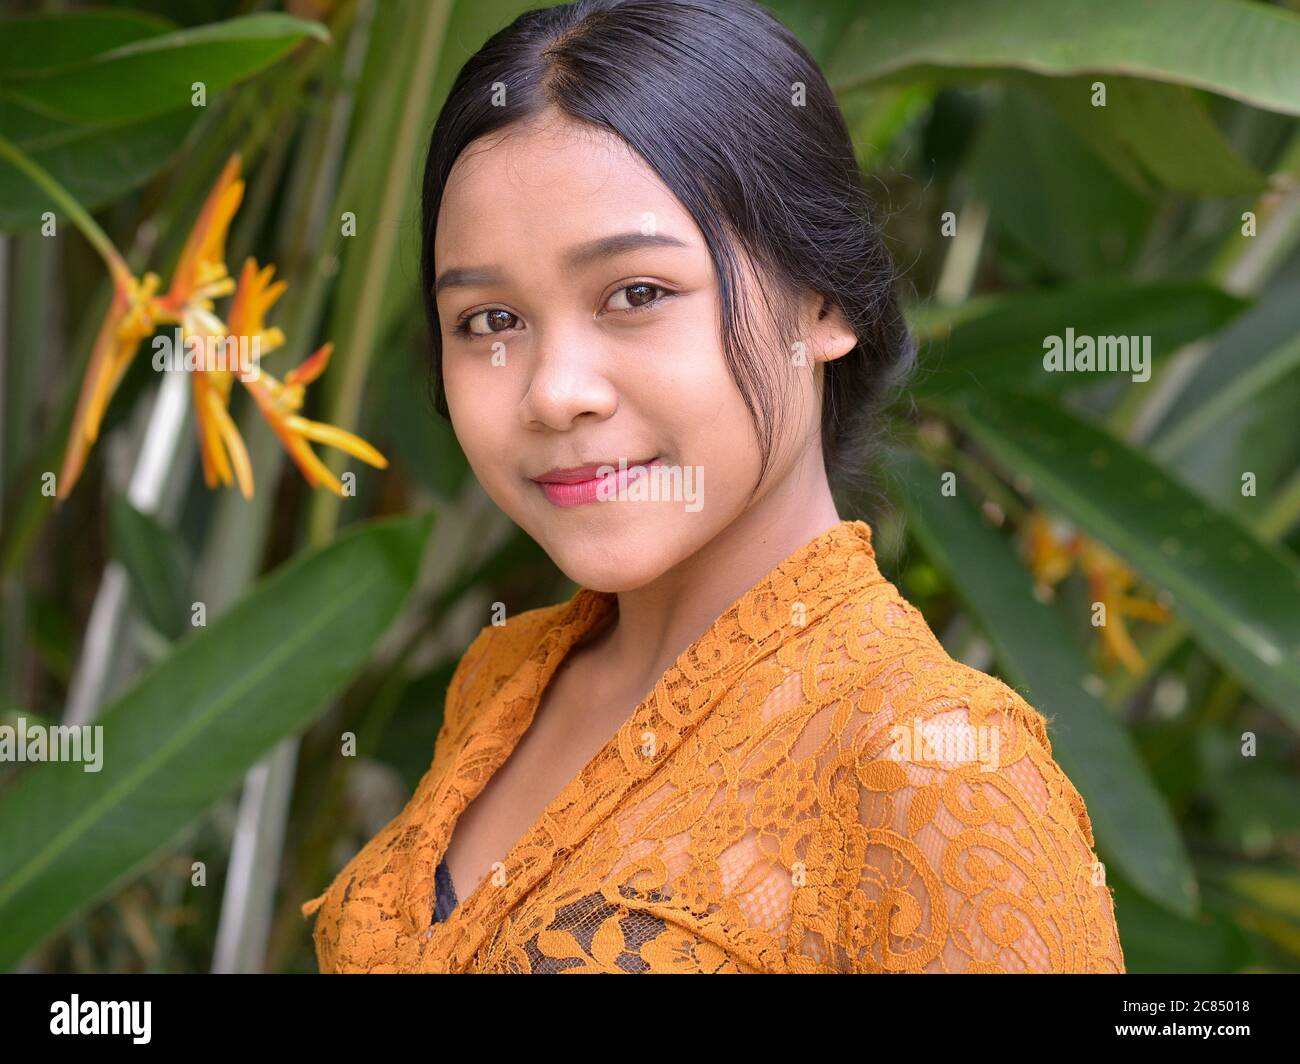 Indonesian Balinese girl wears a traditional Indonesian kebaya lace blouse and poses for the camera. Stock Photo